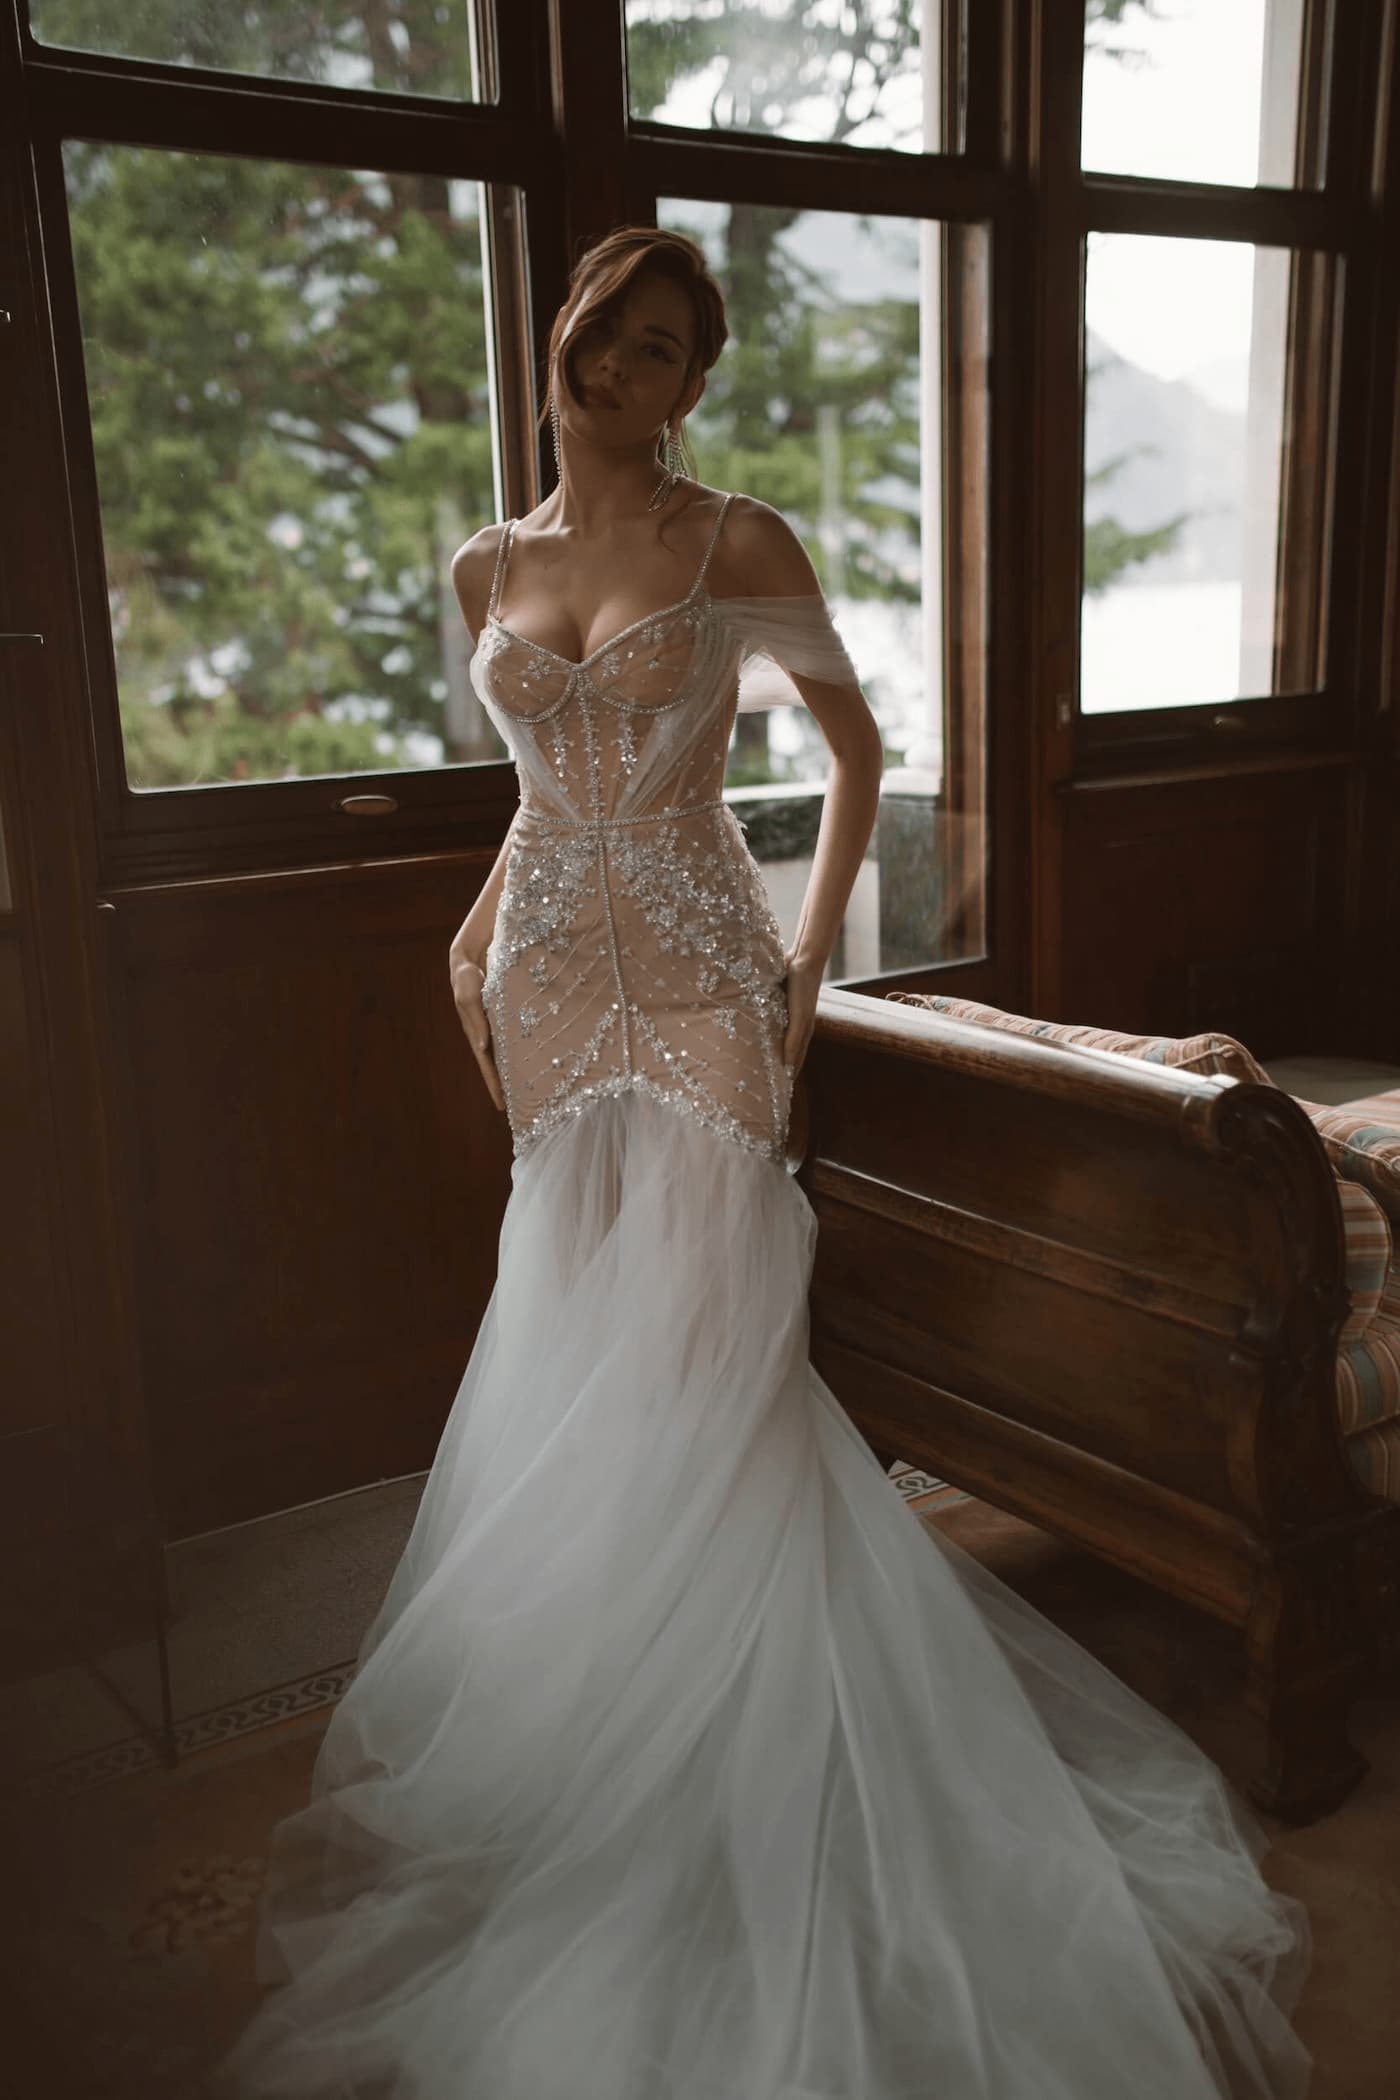 Wedding Dresses For Large Bust Small Waist